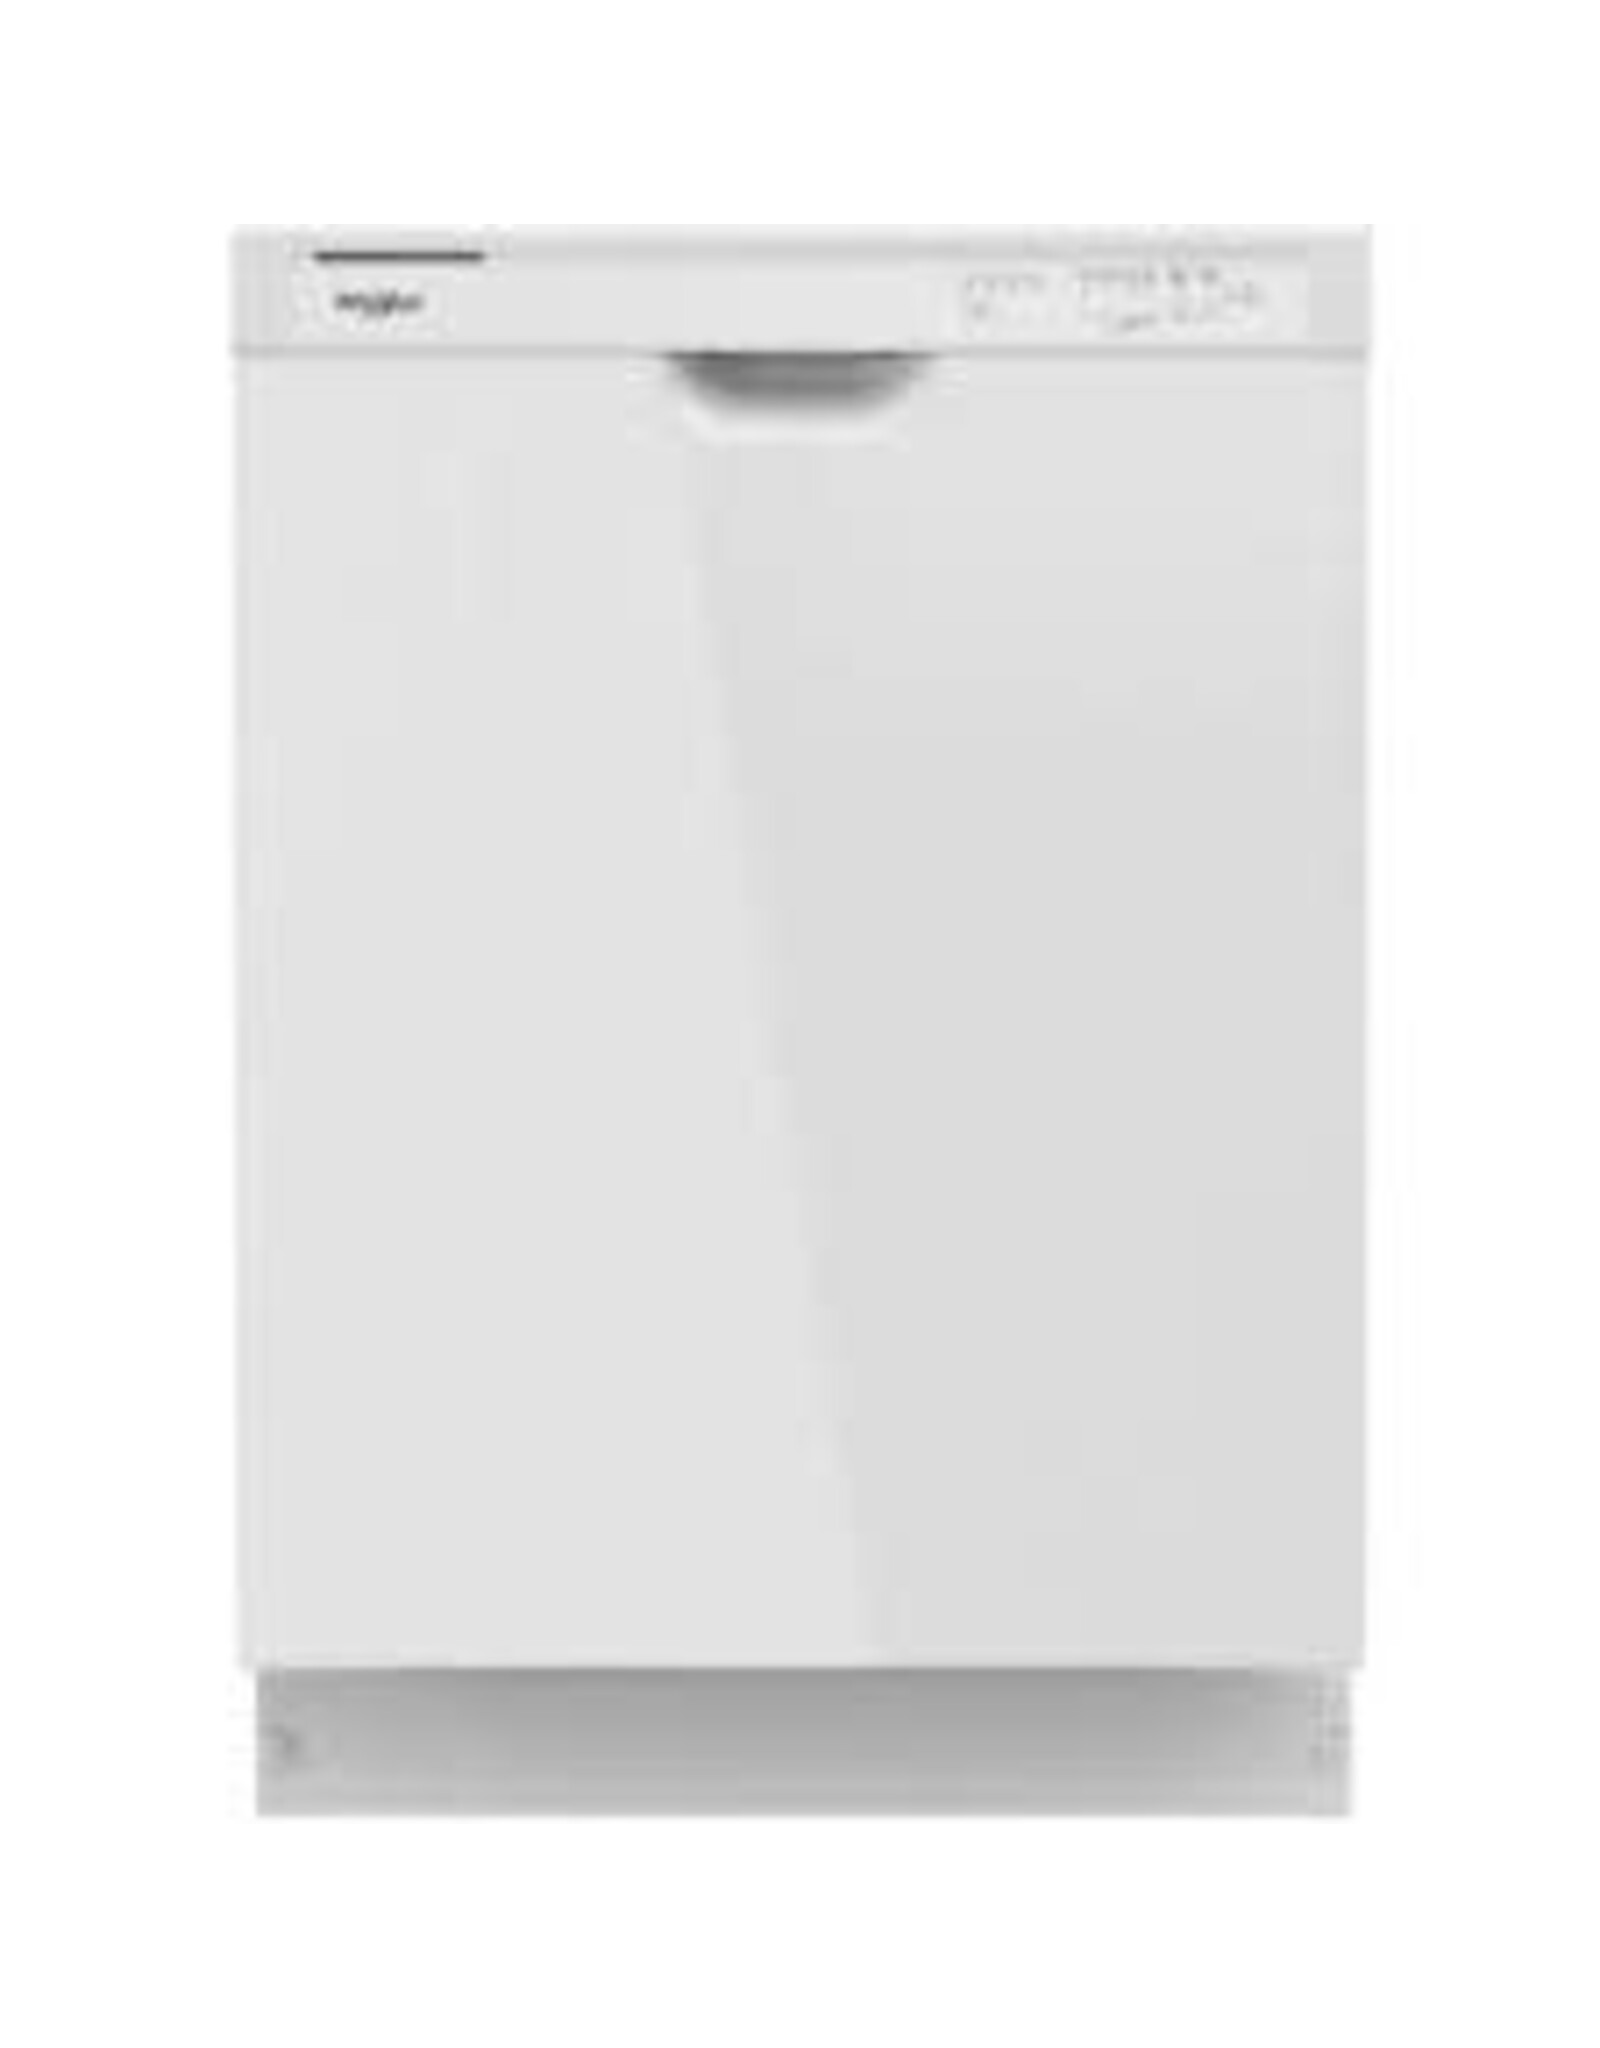 WHIRLPOOL WDF520PADMO - WDF341PAPW Whirlpool Front Control 24-in Built-In Dishwasher (White) ENERGY STAR, 57-dBA